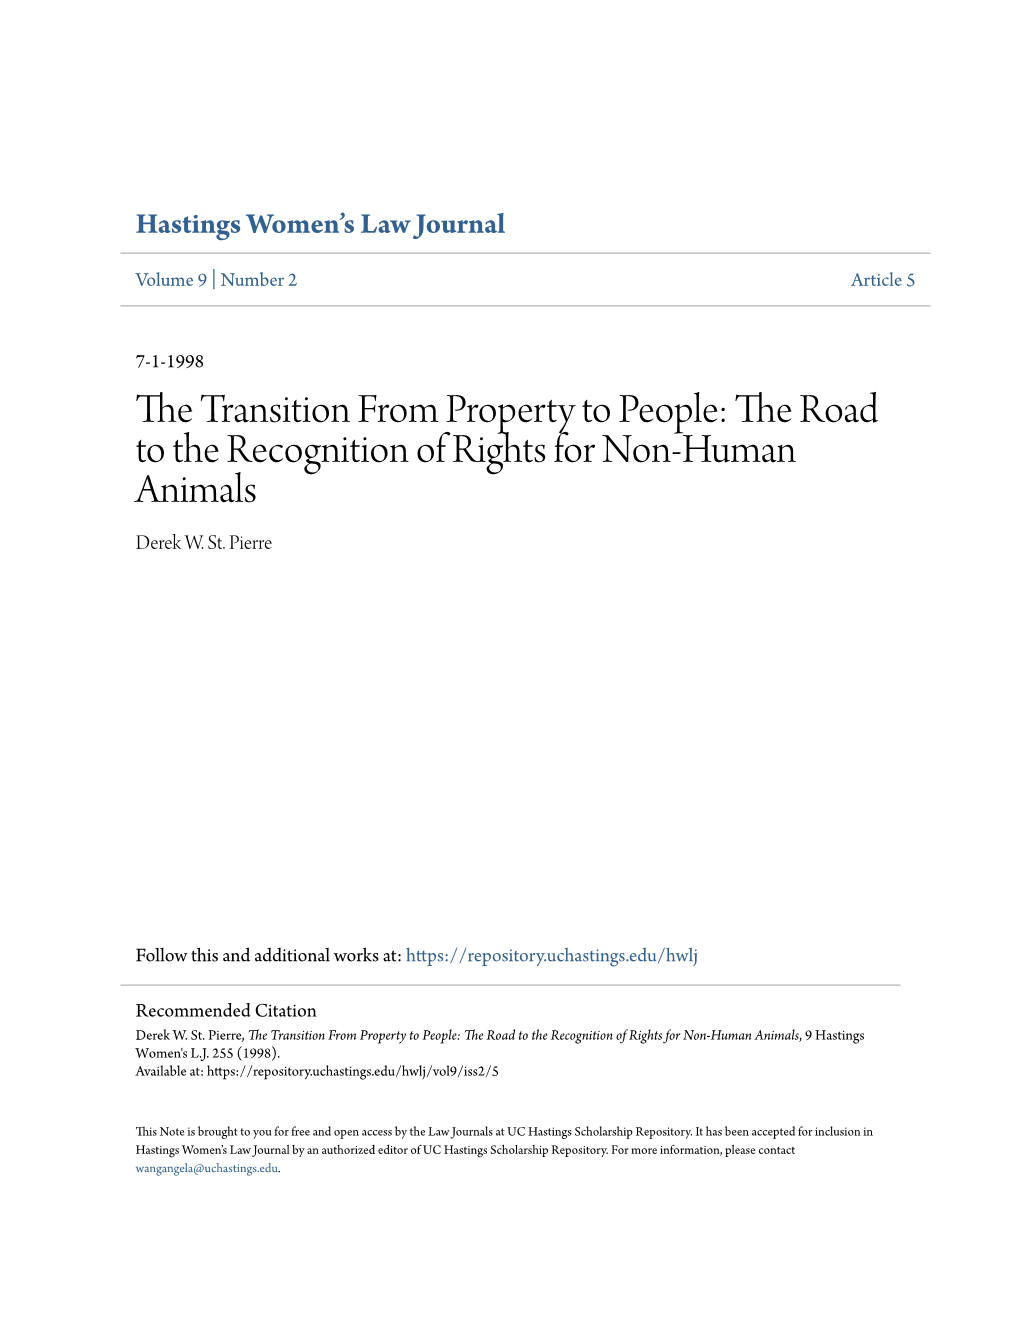 The Transition from Property to People: the Road to the Recognition of Rights for Non-Human Animals, 9 Hastings Women's L.J